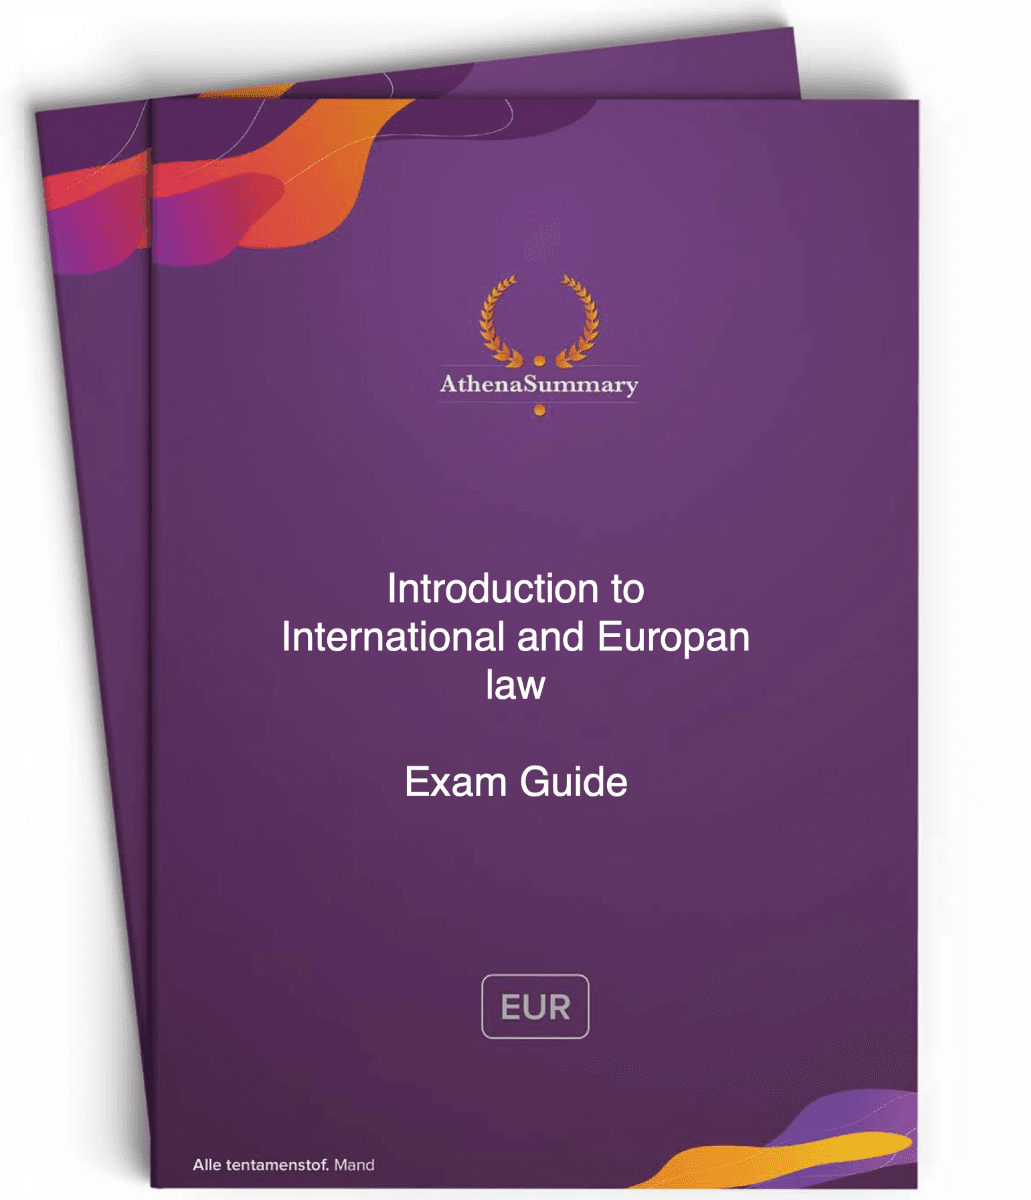 Introduction to International and European Union Law - Exam Guide 22/23